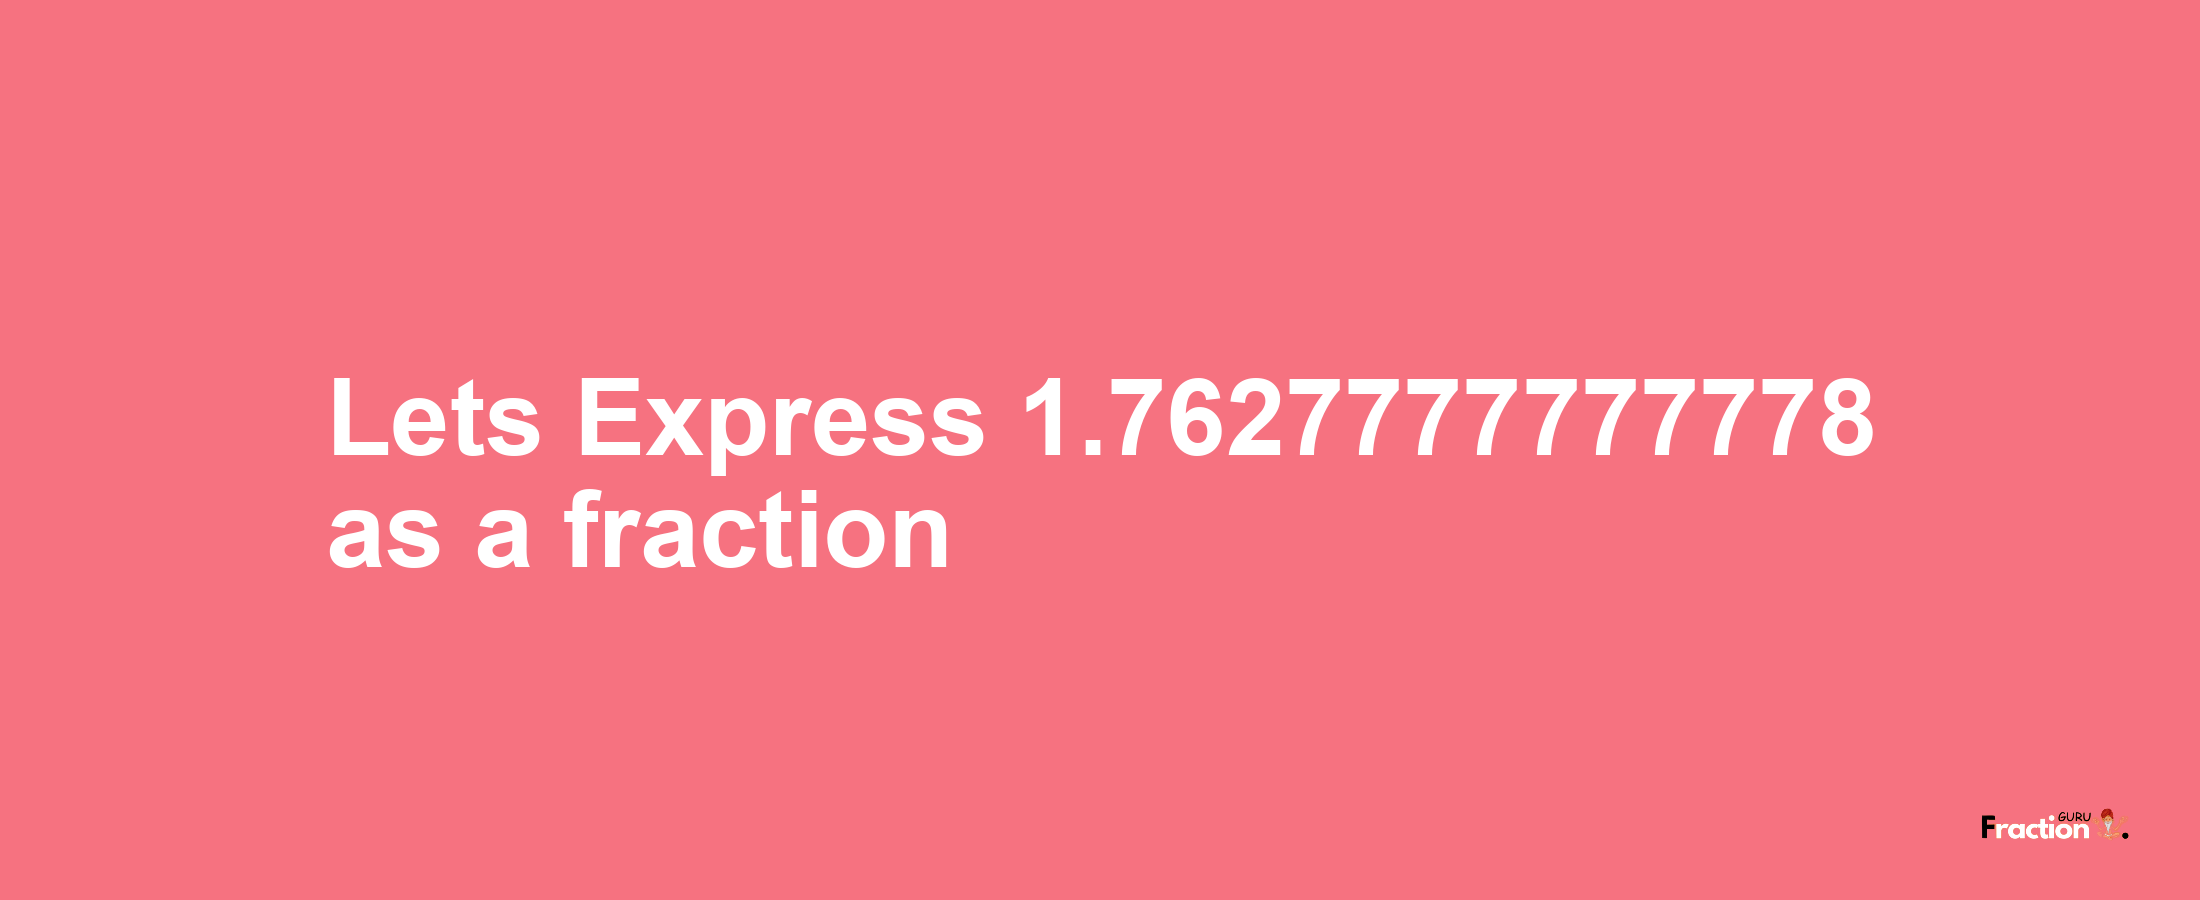 Lets Express 1.7627777777778 as afraction